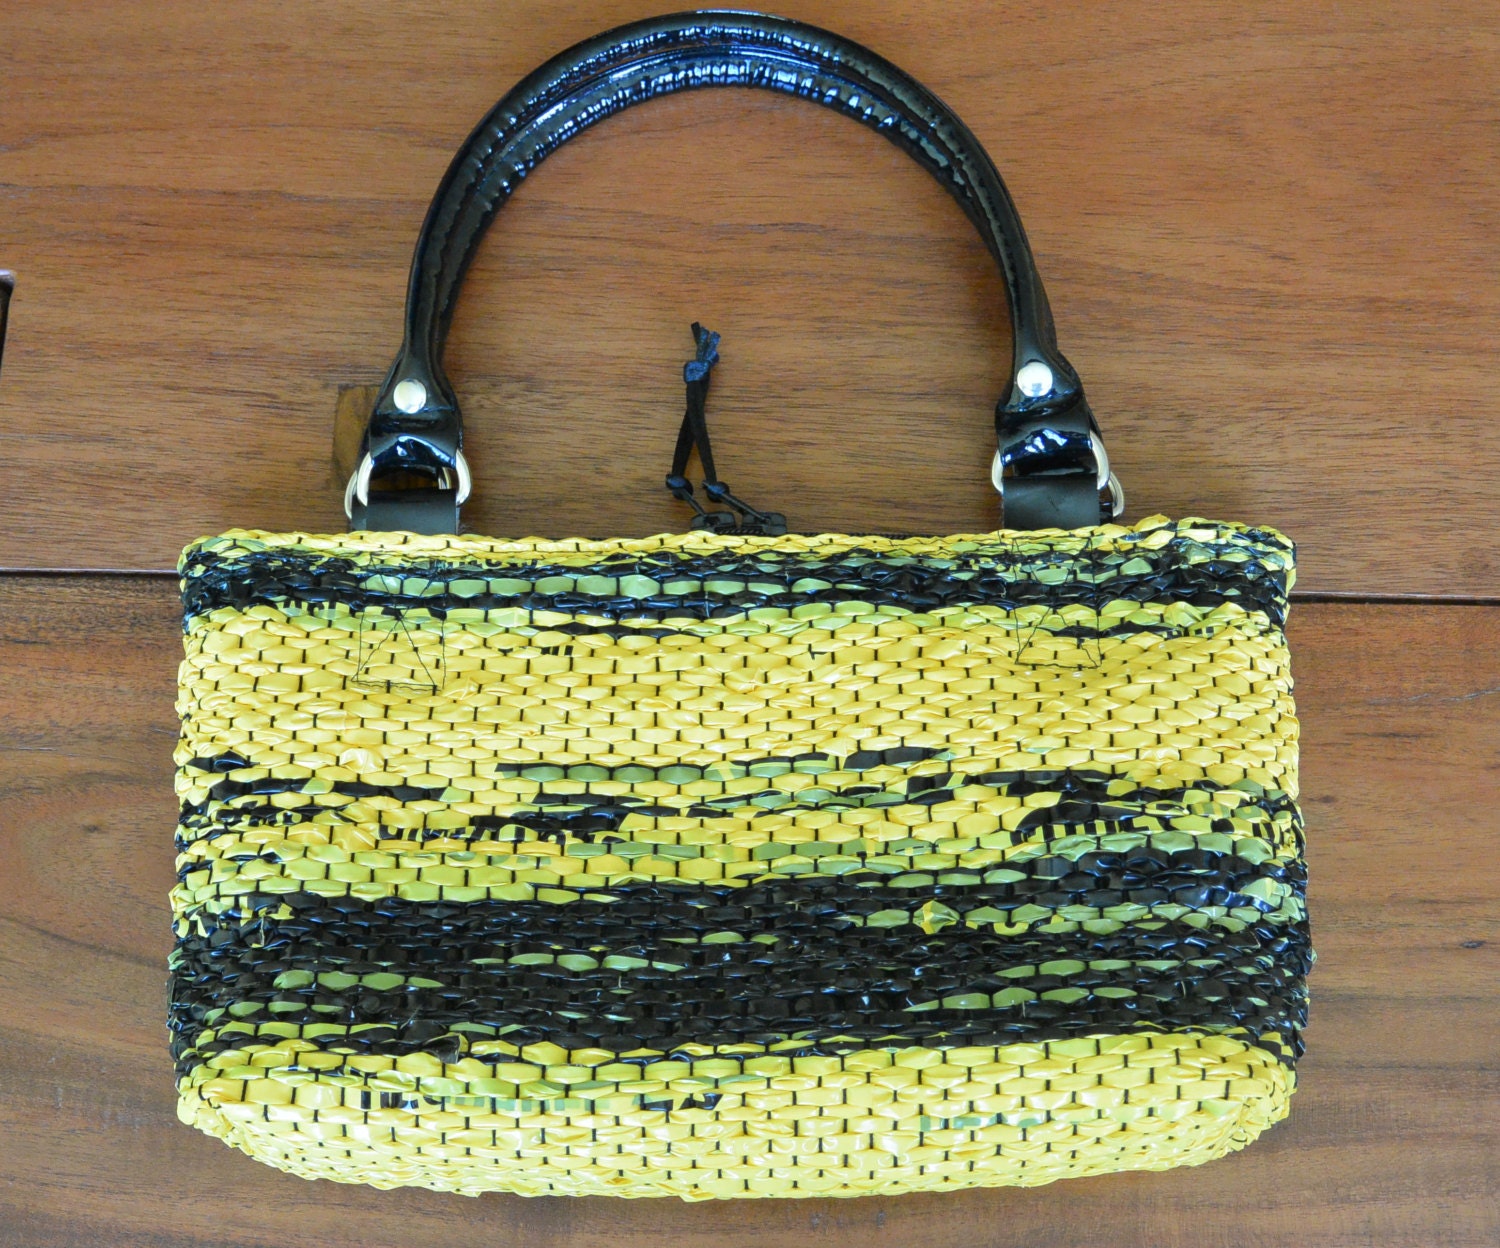 Purse handwoven out of recycled plastic shopping bags